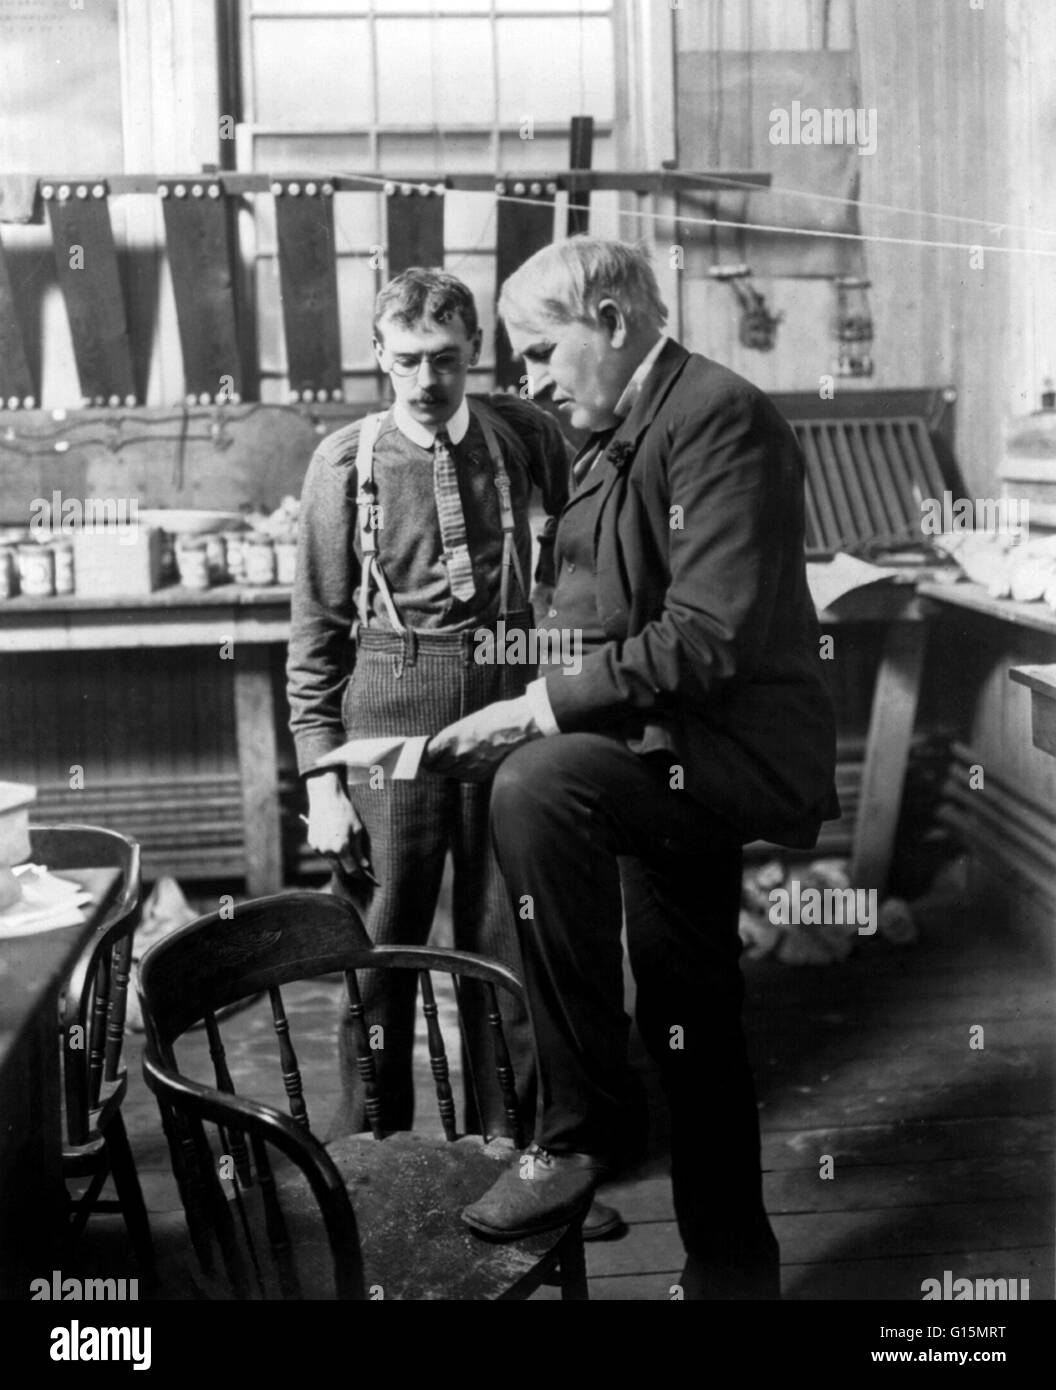 Edison standing with his workman in the chemical room, circa 1906. Thomas Alva Edison (February 11, 1847 - October 18, 1931) was an American inventor and businessman. He developed many devices that greatly influenced life around the world, including the p Stock Photo